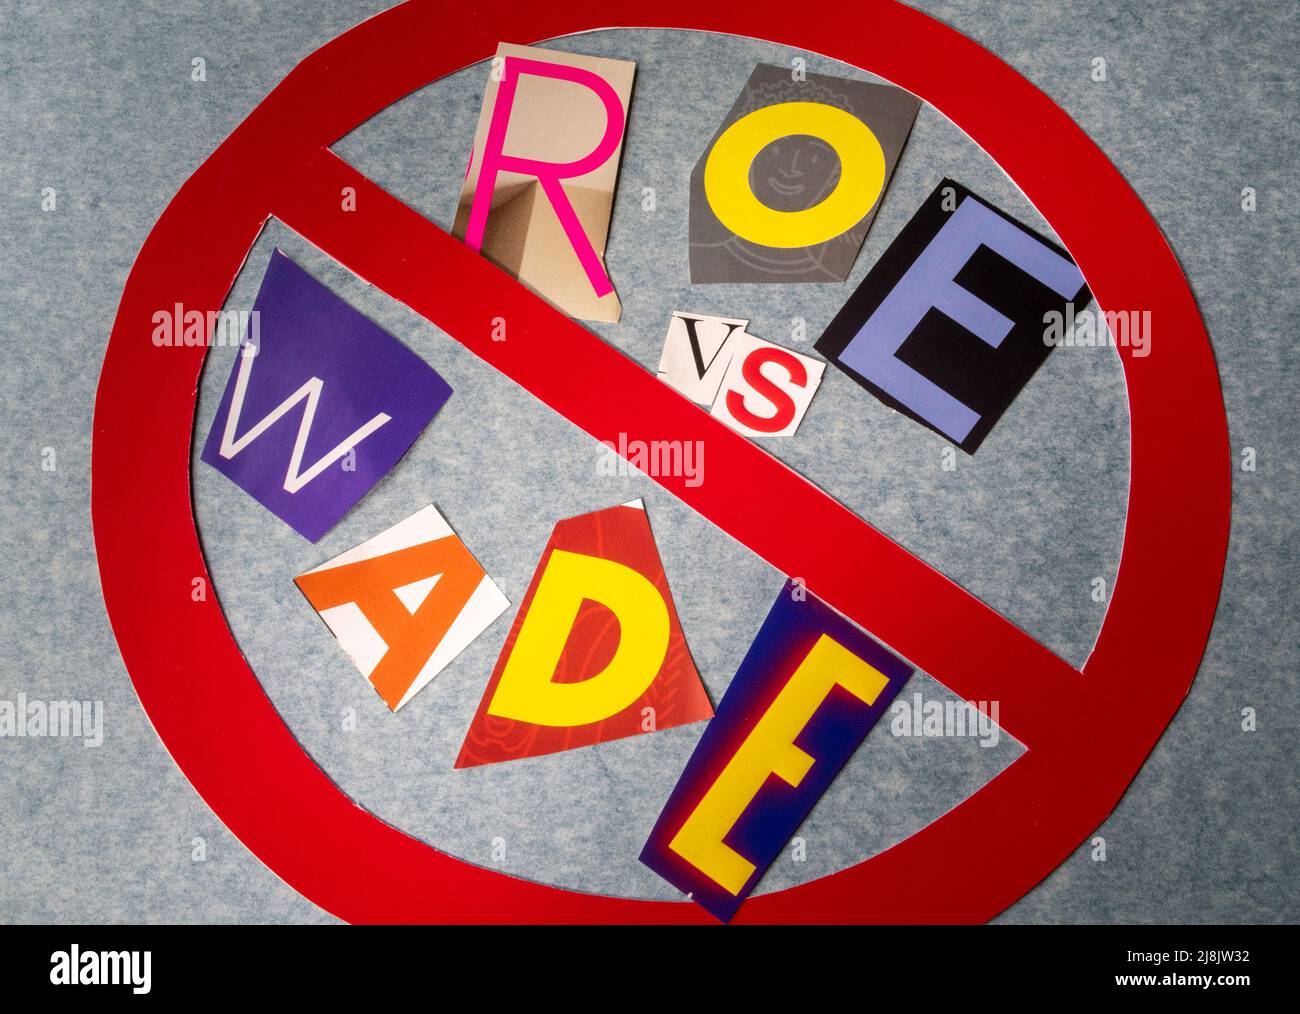 The Concept of 'Cancel Roe vs Wade' using cut-out paper letters in the ransom note effect typography inside The International NO Symbol, USA Stock Photo